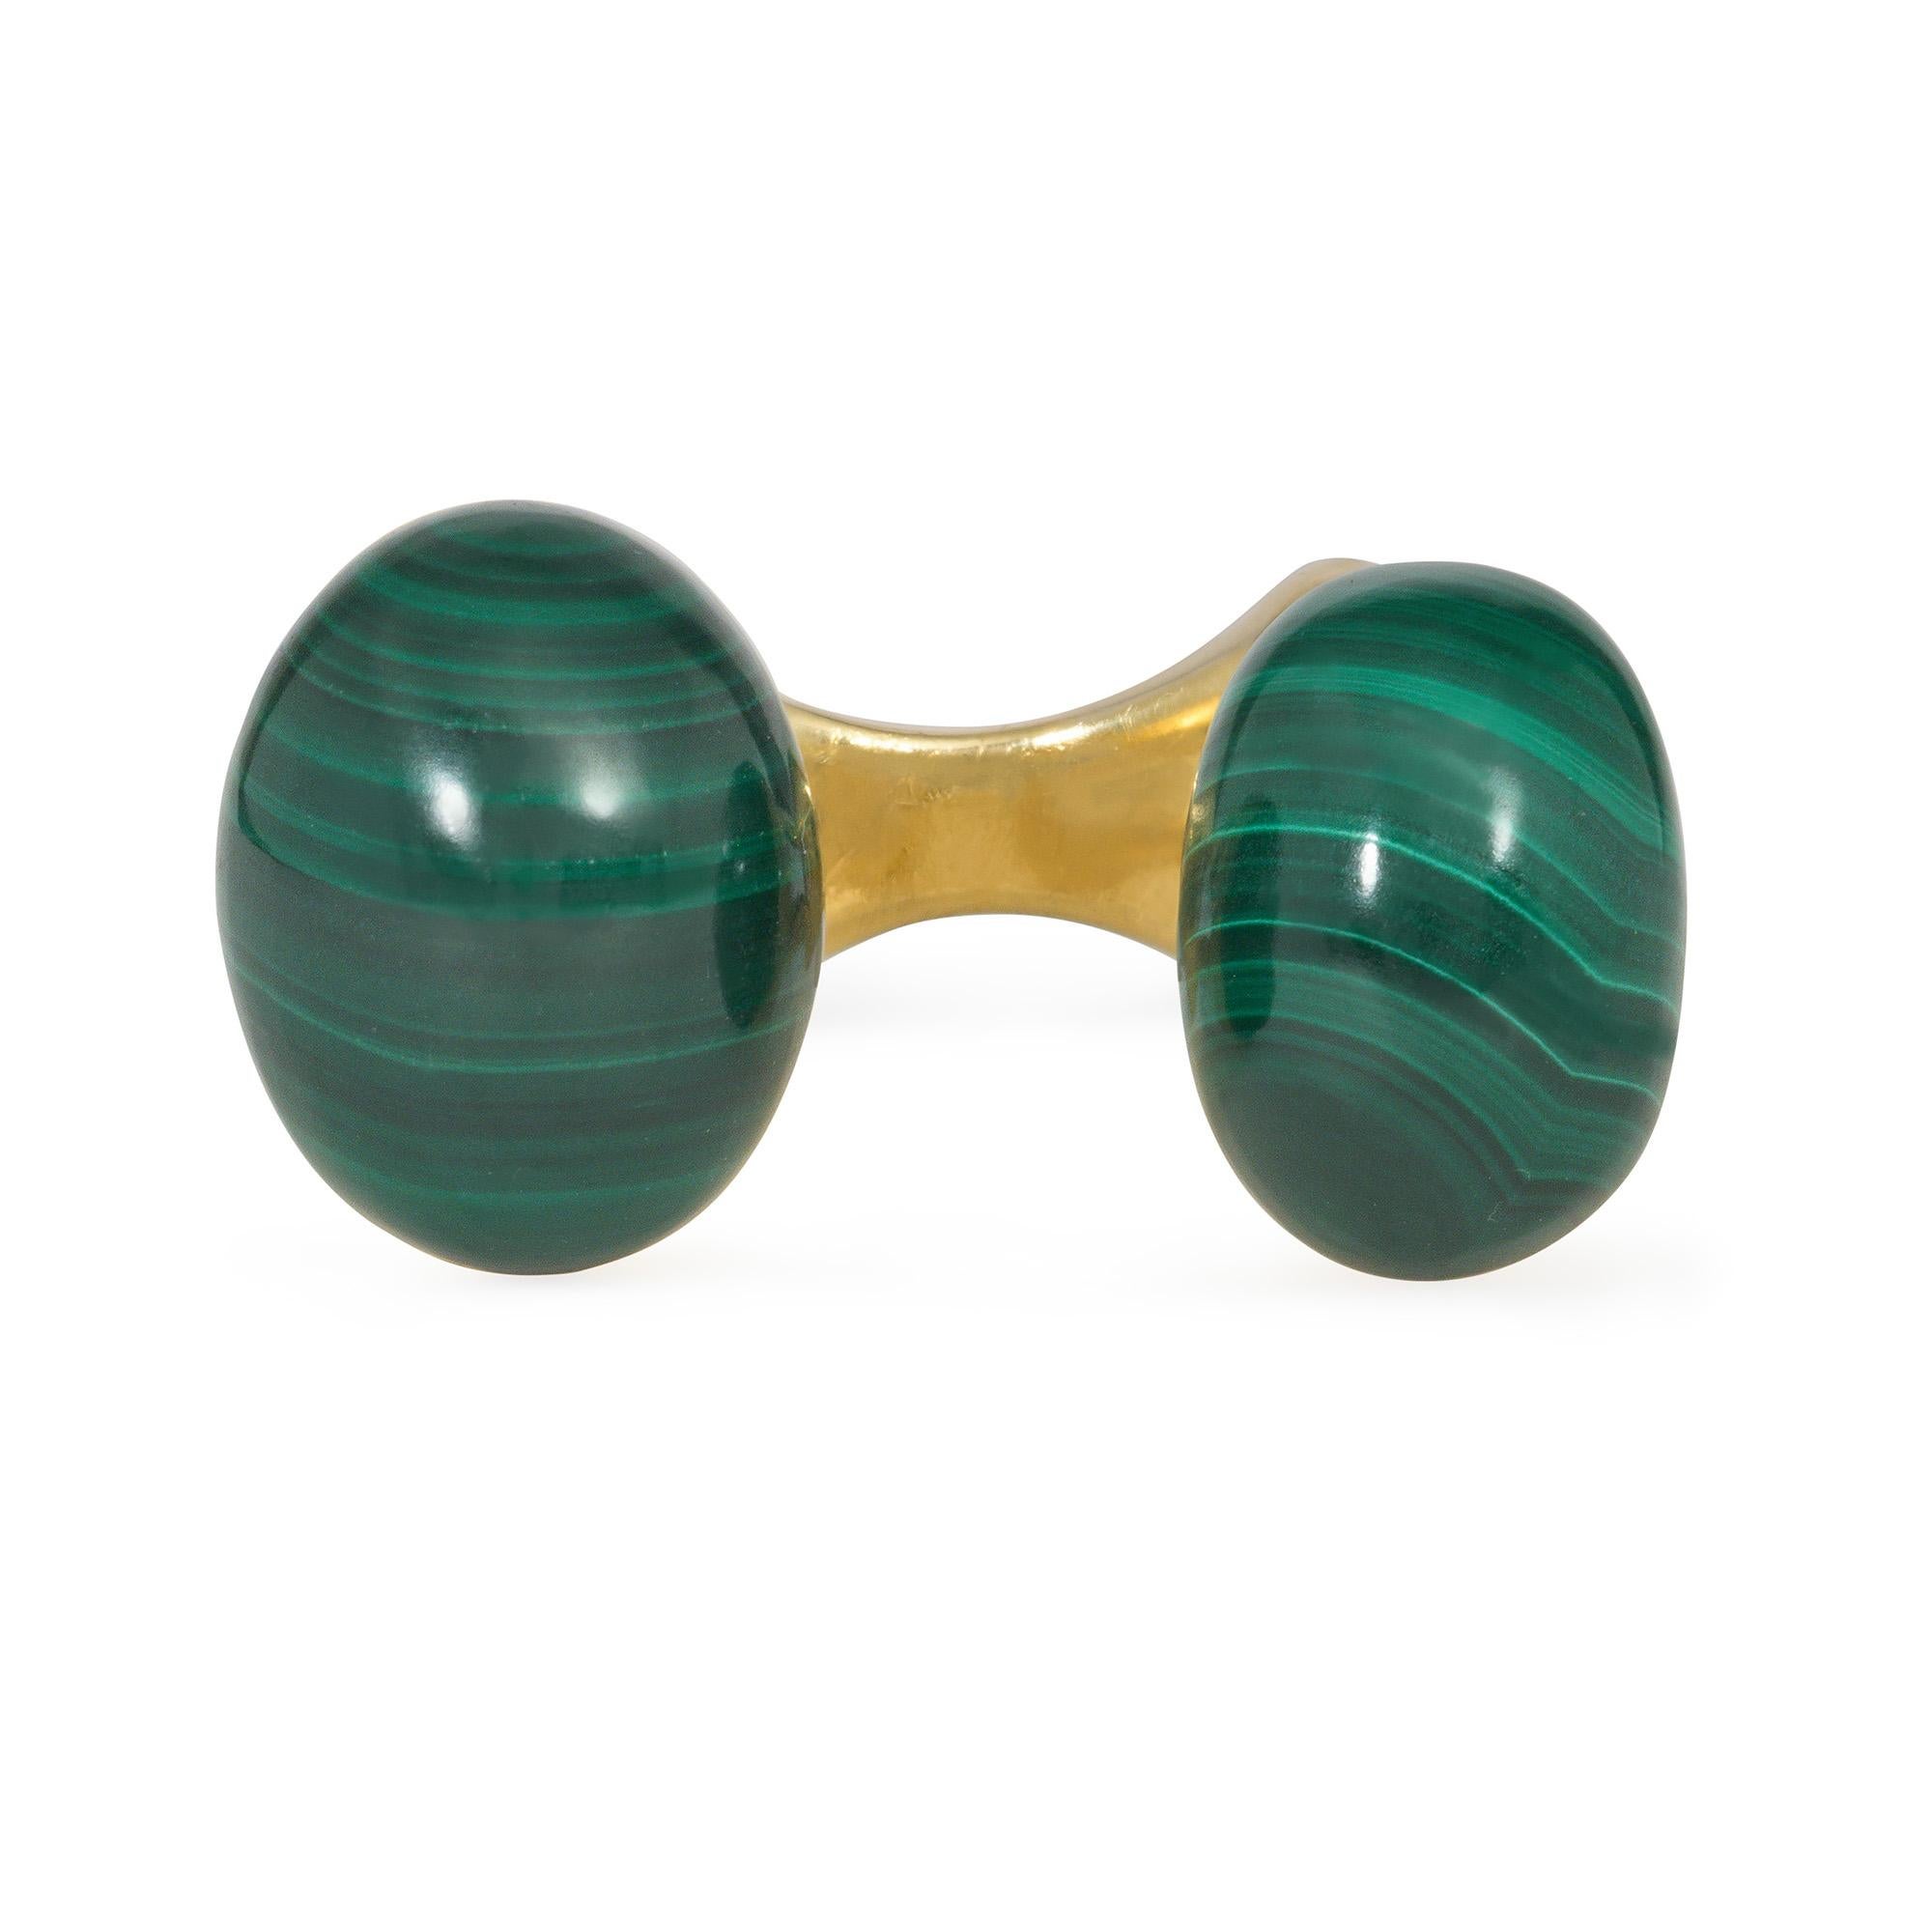 A late 20th-century gold and malachite between the finger ring, comprised of an extruded gold angular mount with open sides, terminating in oval cabochon malachites, in 18k. Italy

Malachites: 15.8x12mm, 13.5x10mm, respectively

Minor re-sizing